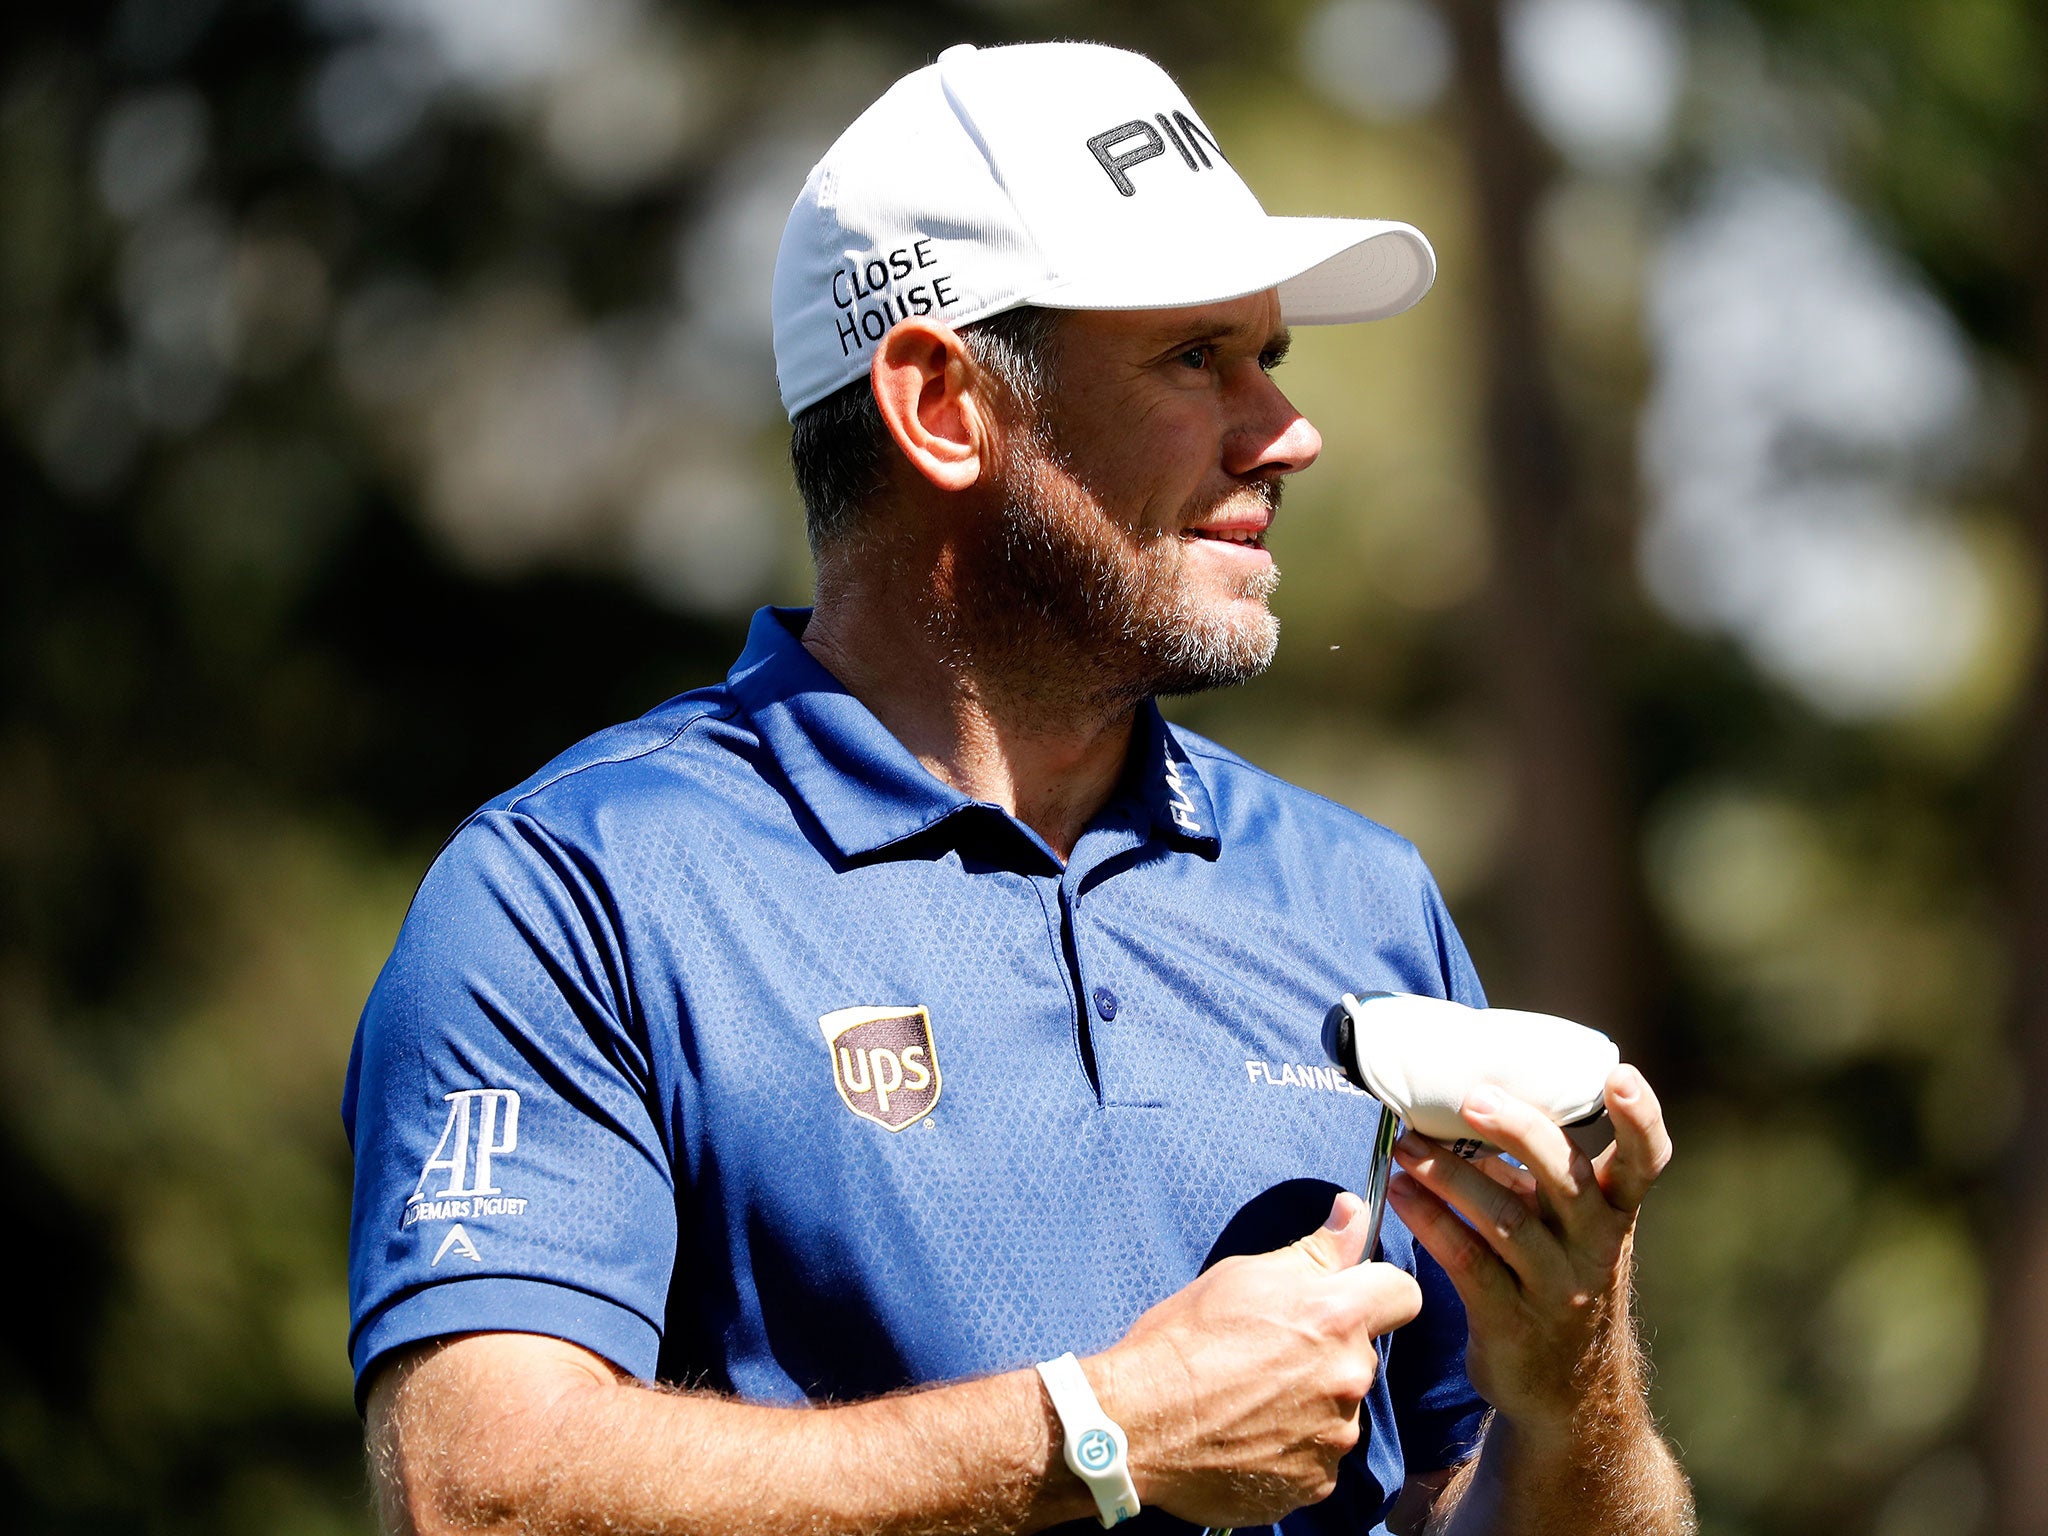 Westwood (117th) is the only player out of the four currently ranked inside the world's top 200